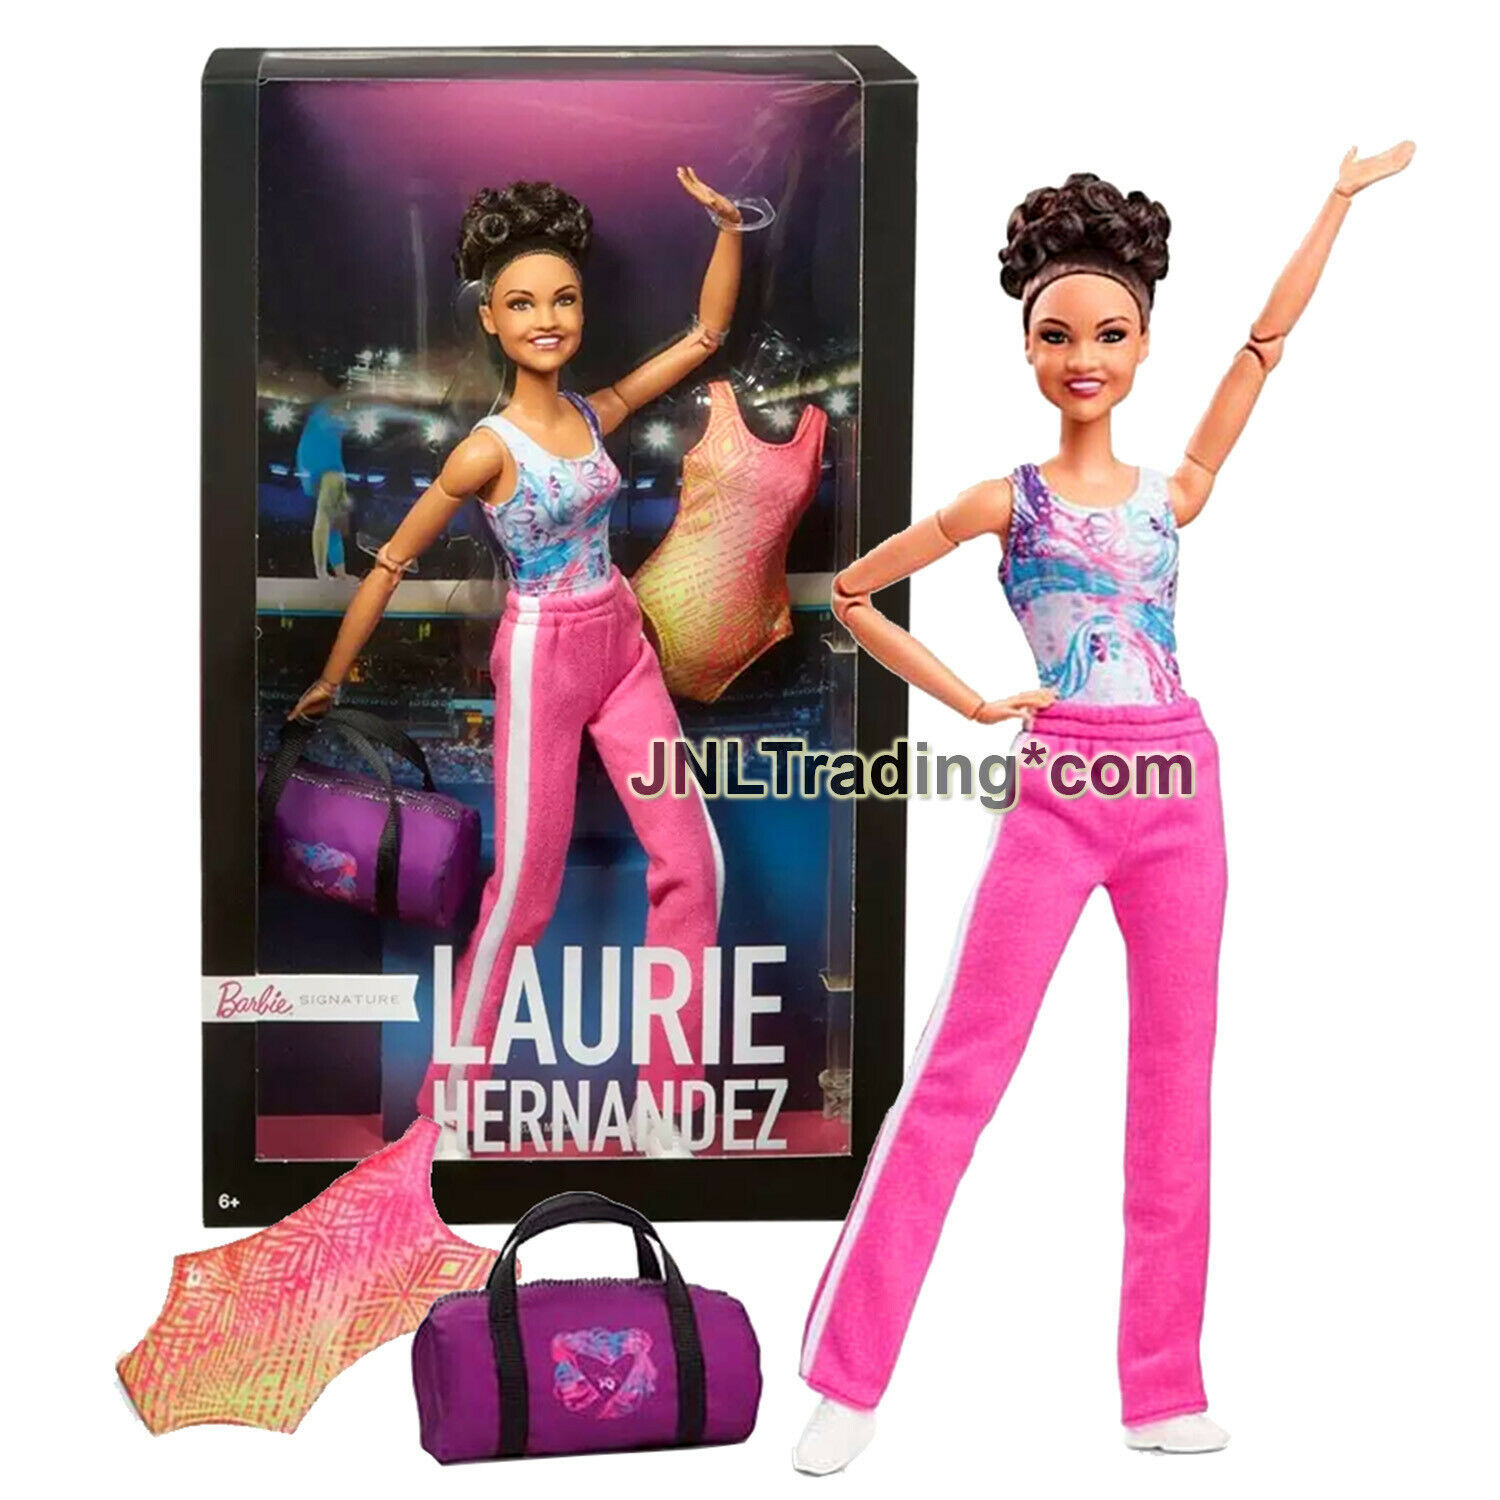 Primary image for Year 2018 Barbie You Can Be Anything Signature Doll Gymnast LAURIE HERNANDEZ